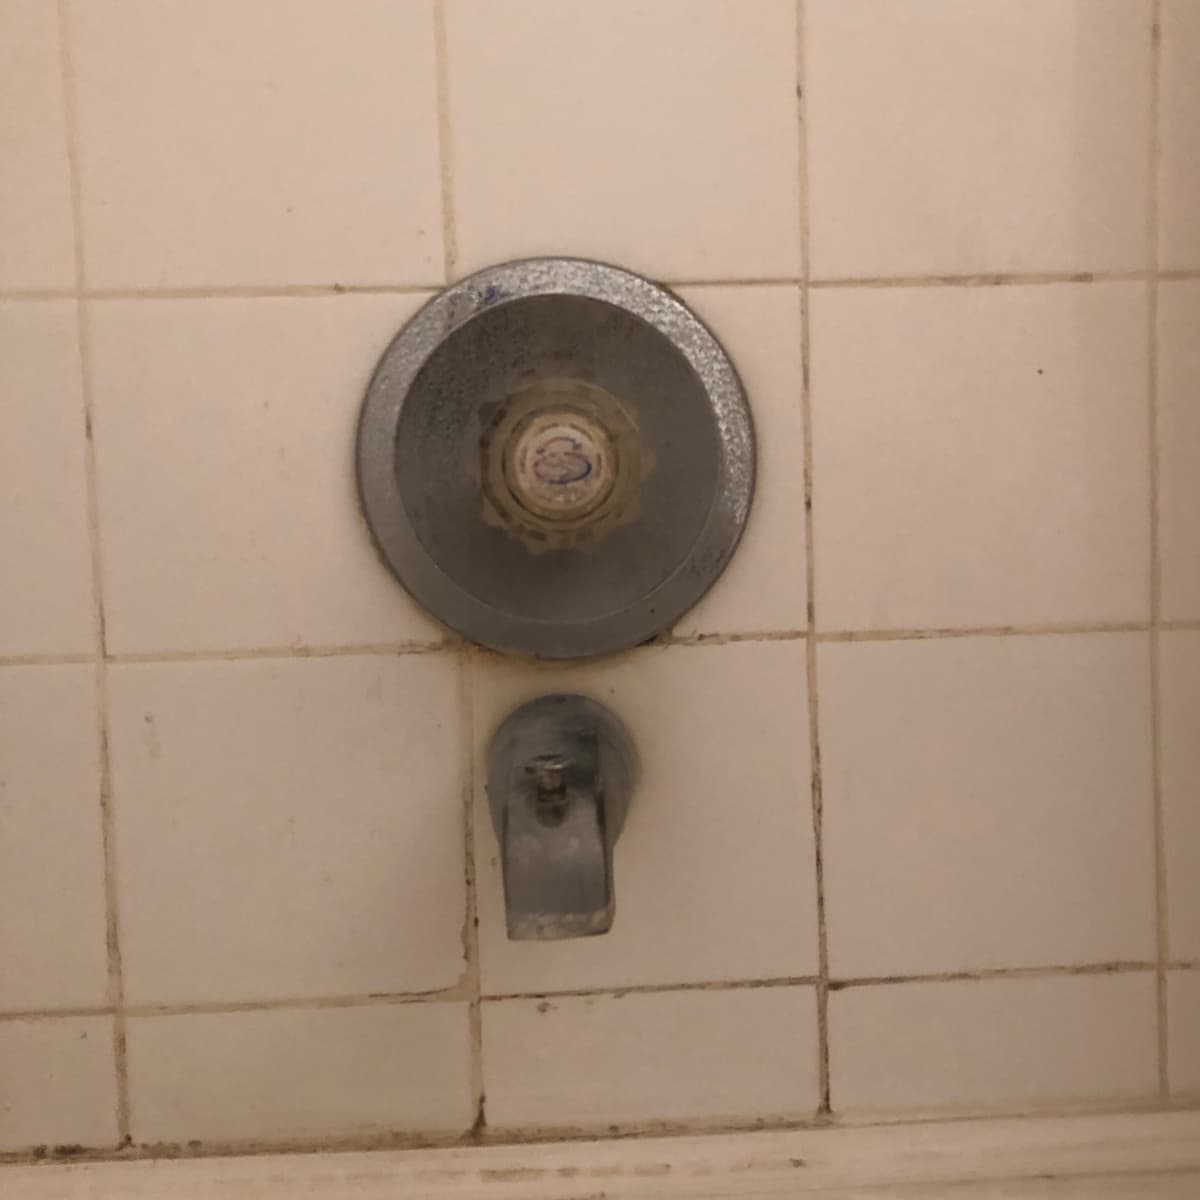 Replace A Single Handle Shower Valve, Bathtub Faucet Handle Safety Covers